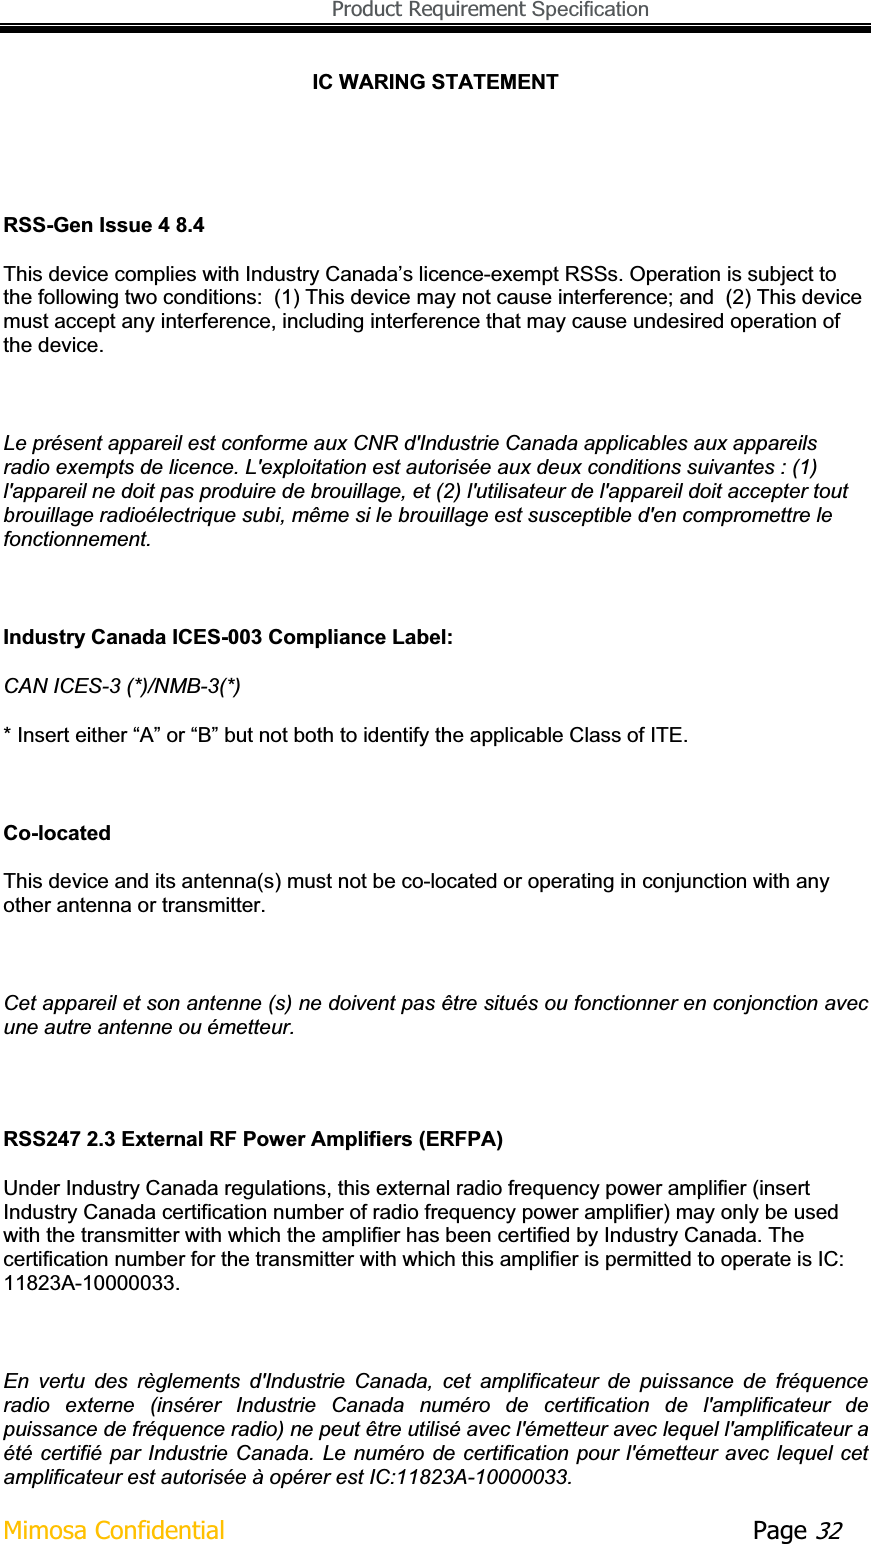   Product Requirement Specification Mimosa Confidential        Page 32IC WARING STATEMENT Industry Canada ICES-003 Compliance Label:  CAN ICES-3 (*)/NMB-3(*)  * Insert either “A” or “B” but not both to identify the applicable Class of ITE. Co-located This device and its antenna(s) must not be co-located or operating in conjunction with any other antenna or transmitter. Cet appareil et son antenne (s) ne doivent pas être situés ou fonctionner en conjonction avec une autre antenne ou émetteur. RSS247 2.3 External RF Power Amplifiers (ERFPA)Under Industry Canada regulations, this external radio frequency power amplifier (insert Industry Canada certification number of radio frequency power amplifier) may only be used with the transmitter with which the amplifier has been certified by Industry Canada. The certification number for the transmitter with which this amplifier is permitted to operate is IC: 11823A-10000033.En  vertu  des  règlements  d&apos;Industrie  Canada,  cet  amplificateur  de  puissance  de  fréquence radio  externe  (insérer  Industrie  Canada  numéro  de  certification  de  l&apos;amplificateur  de puissance de fréquence radio) ne peut être utilisé avec l&apos;émetteur avec lequel l&apos;amplificateur a été certifié par Industrie Canada. Le numéro  de certification pour  l&apos;émetteur avec lequel  cet amplificateur est autorisée à opérer est IC:11823A-10000033. RSS-Gen Issue 4 8.4 This device complies with Industry Canada’s licence-exempt RSSs. Operation is subject to the following two conditions:  (1) This device may not cause interference; and  (2) This device must accept any interference, including interference that may cause undesired operation of the device. Le présent appareil est conforme aux CNR d&apos;Industrie Canada applicables aux appareils radio exempts de licence. L&apos;exploitation est autorisée aux deux conditions suivantes : (1) l&apos;appareil ne doit pas produire de brouillage, et (2) l&apos;utilisateur de l&apos;appareil doit accepter tout brouillage radioélectrique subi, même si le brouillage est susceptible d&apos;en compromettre le fonctionnement.